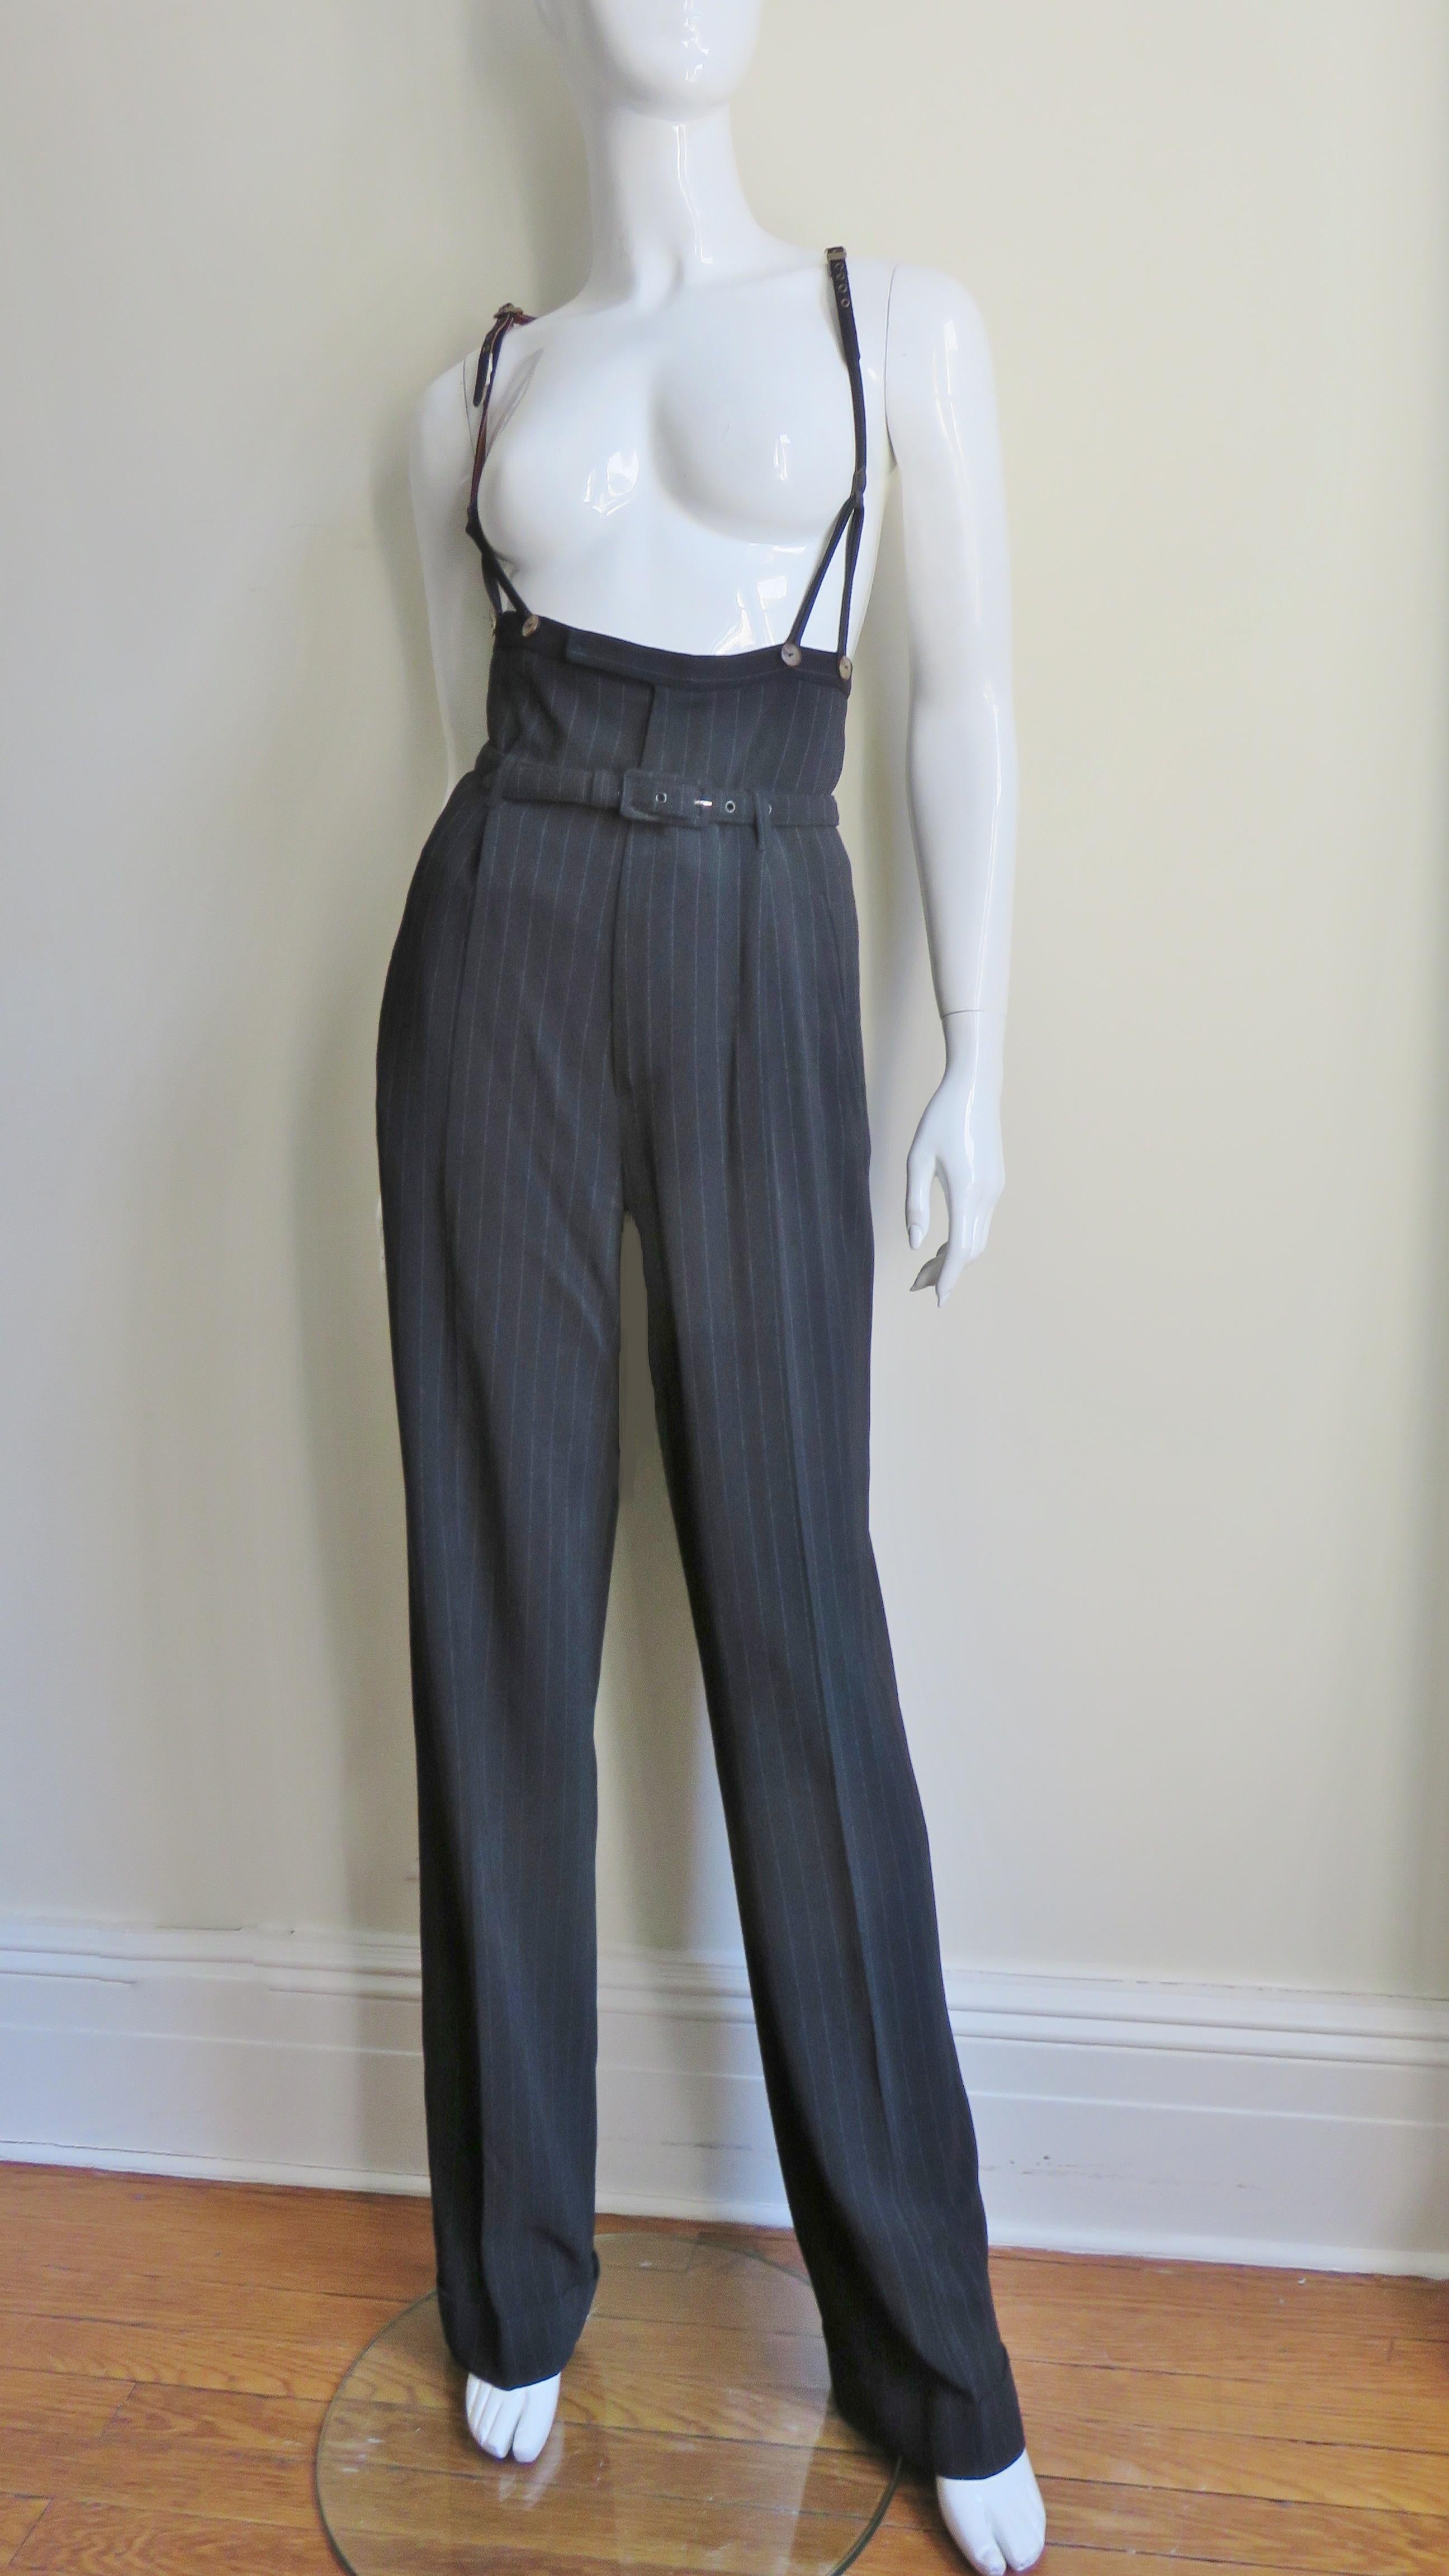 Fabulous black with white pinstripe high waist pants from Jean Paul Gaultier.  High waist with matching adjustable suspenders that button onto the pants and a matching belt at the natural waist where there is pleating and 2 front welt pockets and